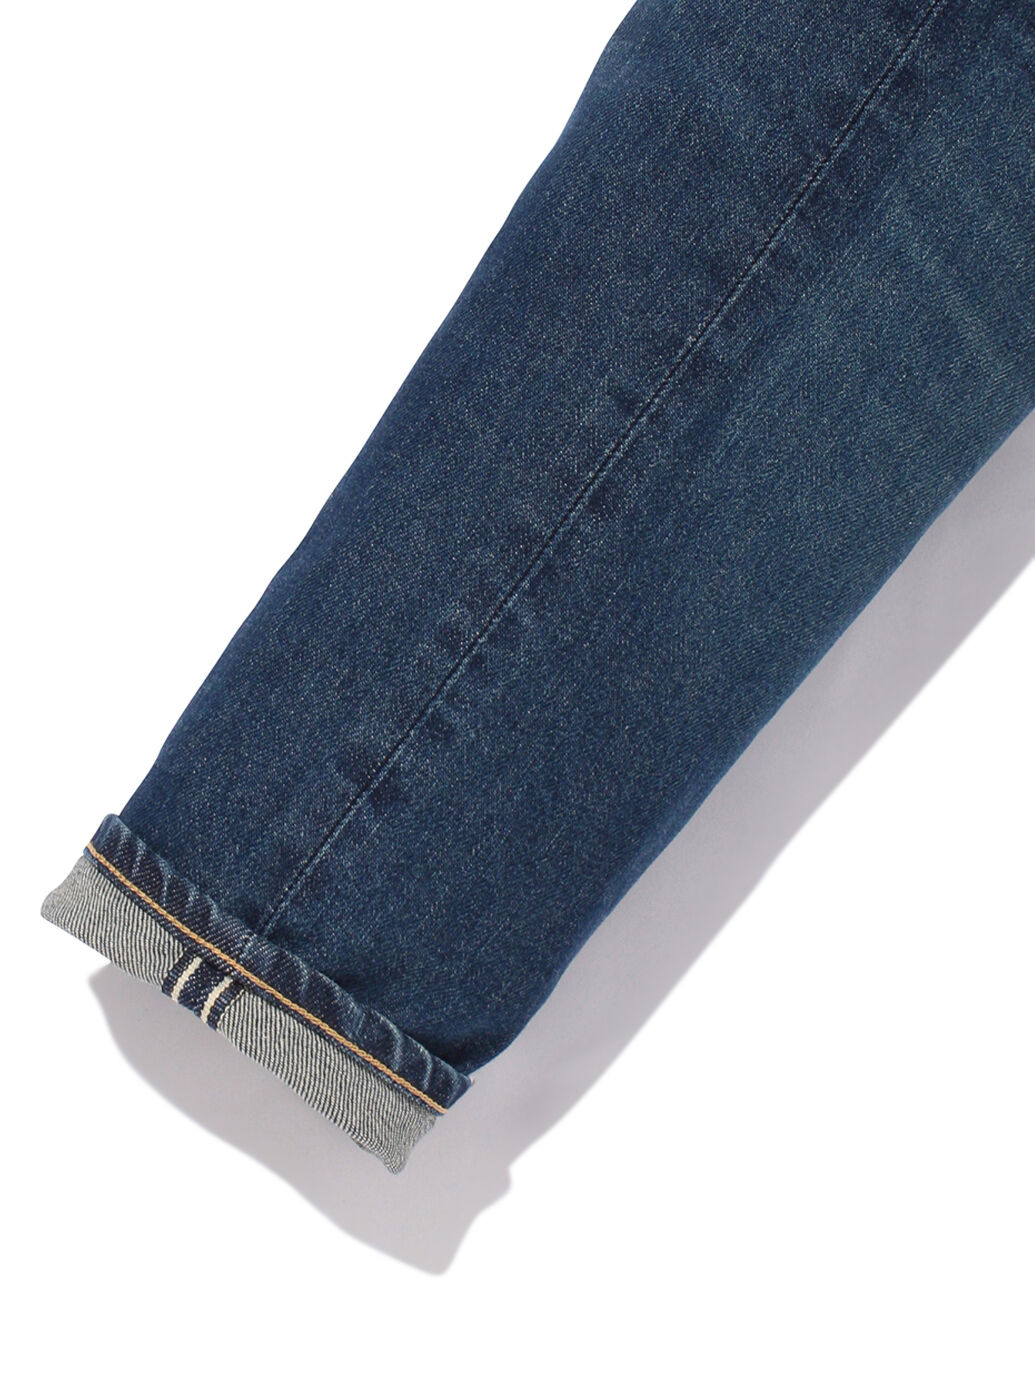 LEVI'S® MADE&CRAFTED®HIGH RISE BORROWED FROM THE BOYS CHIKARE MADE